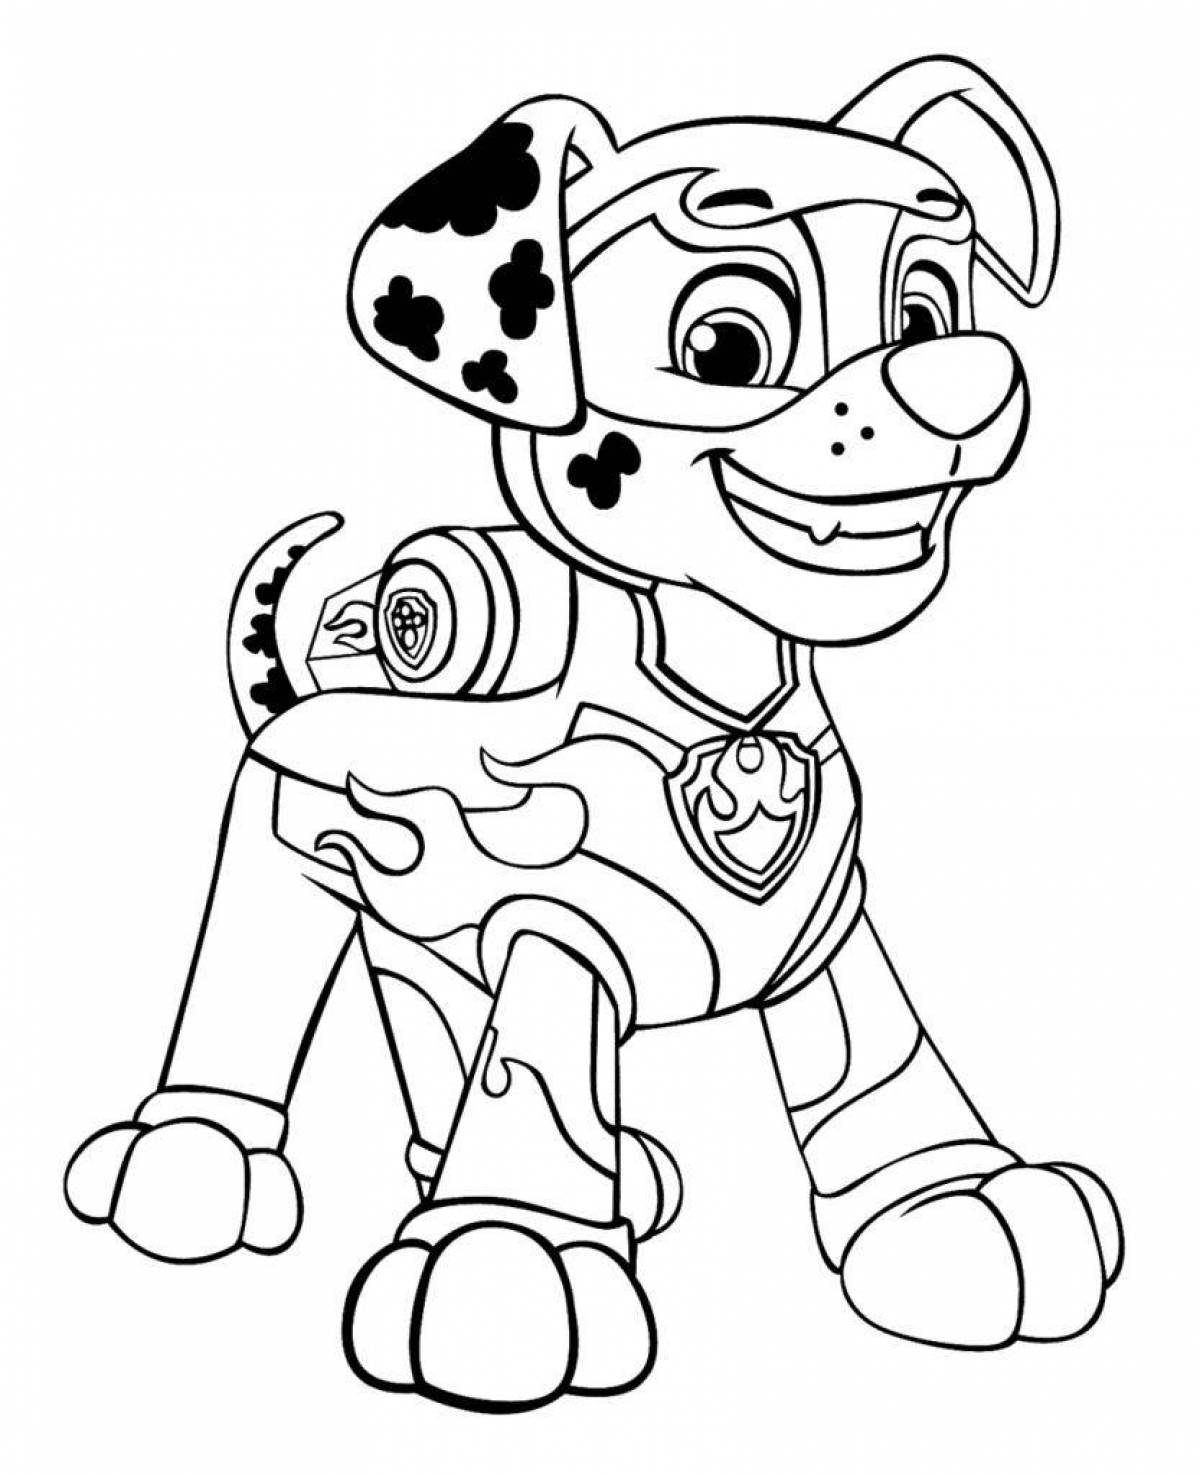 Playful coloring page paw patrol super puppies